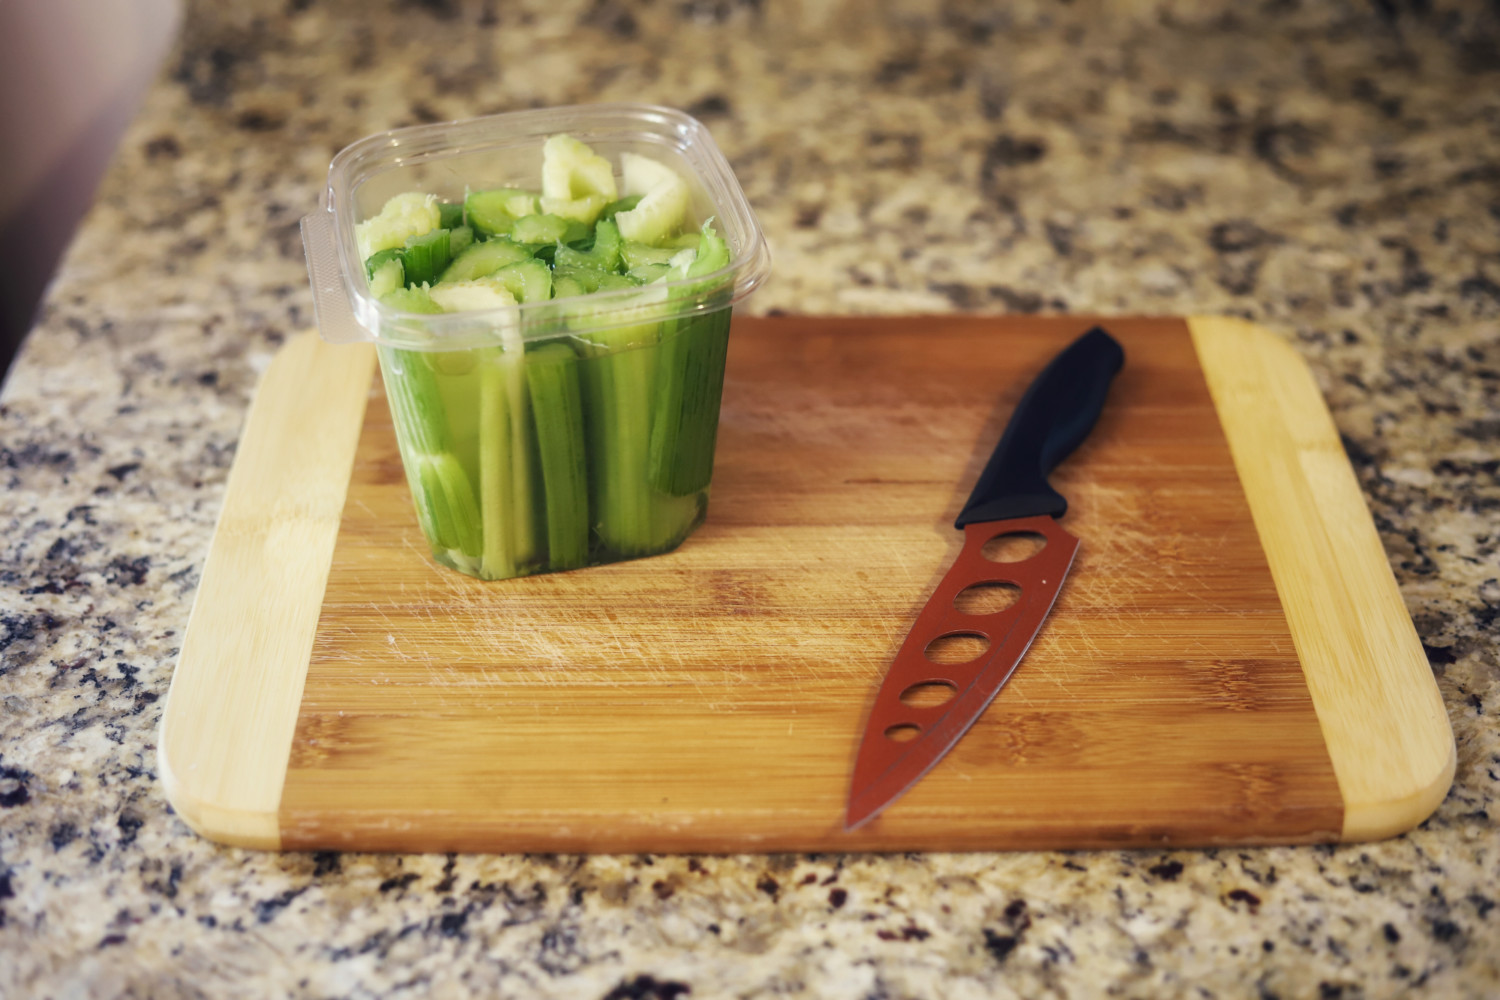 How To Store Cut Celery